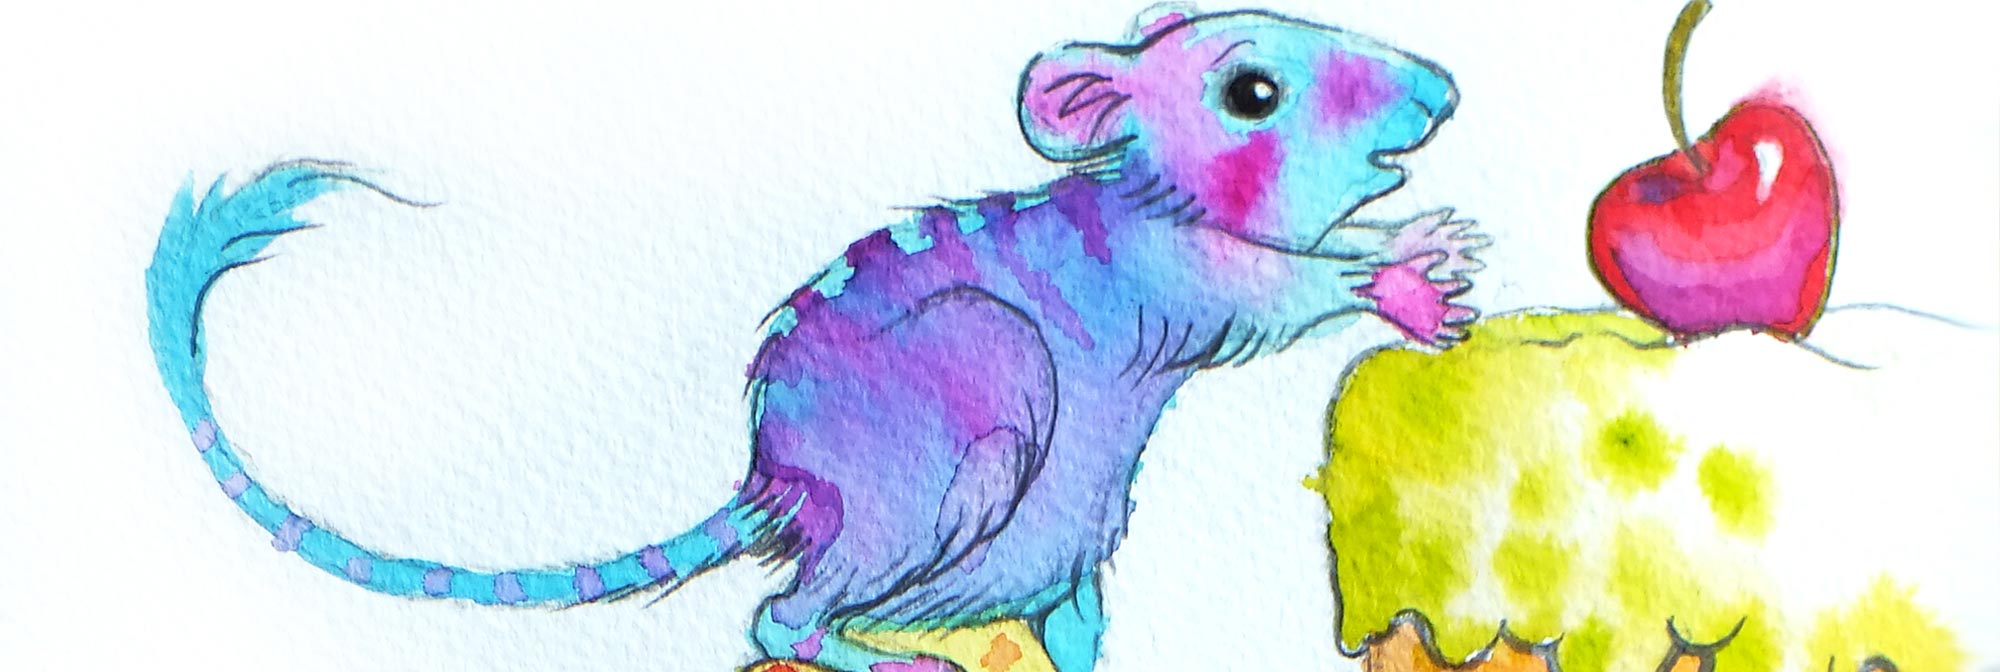 draw childrens book illustrations in watercolor